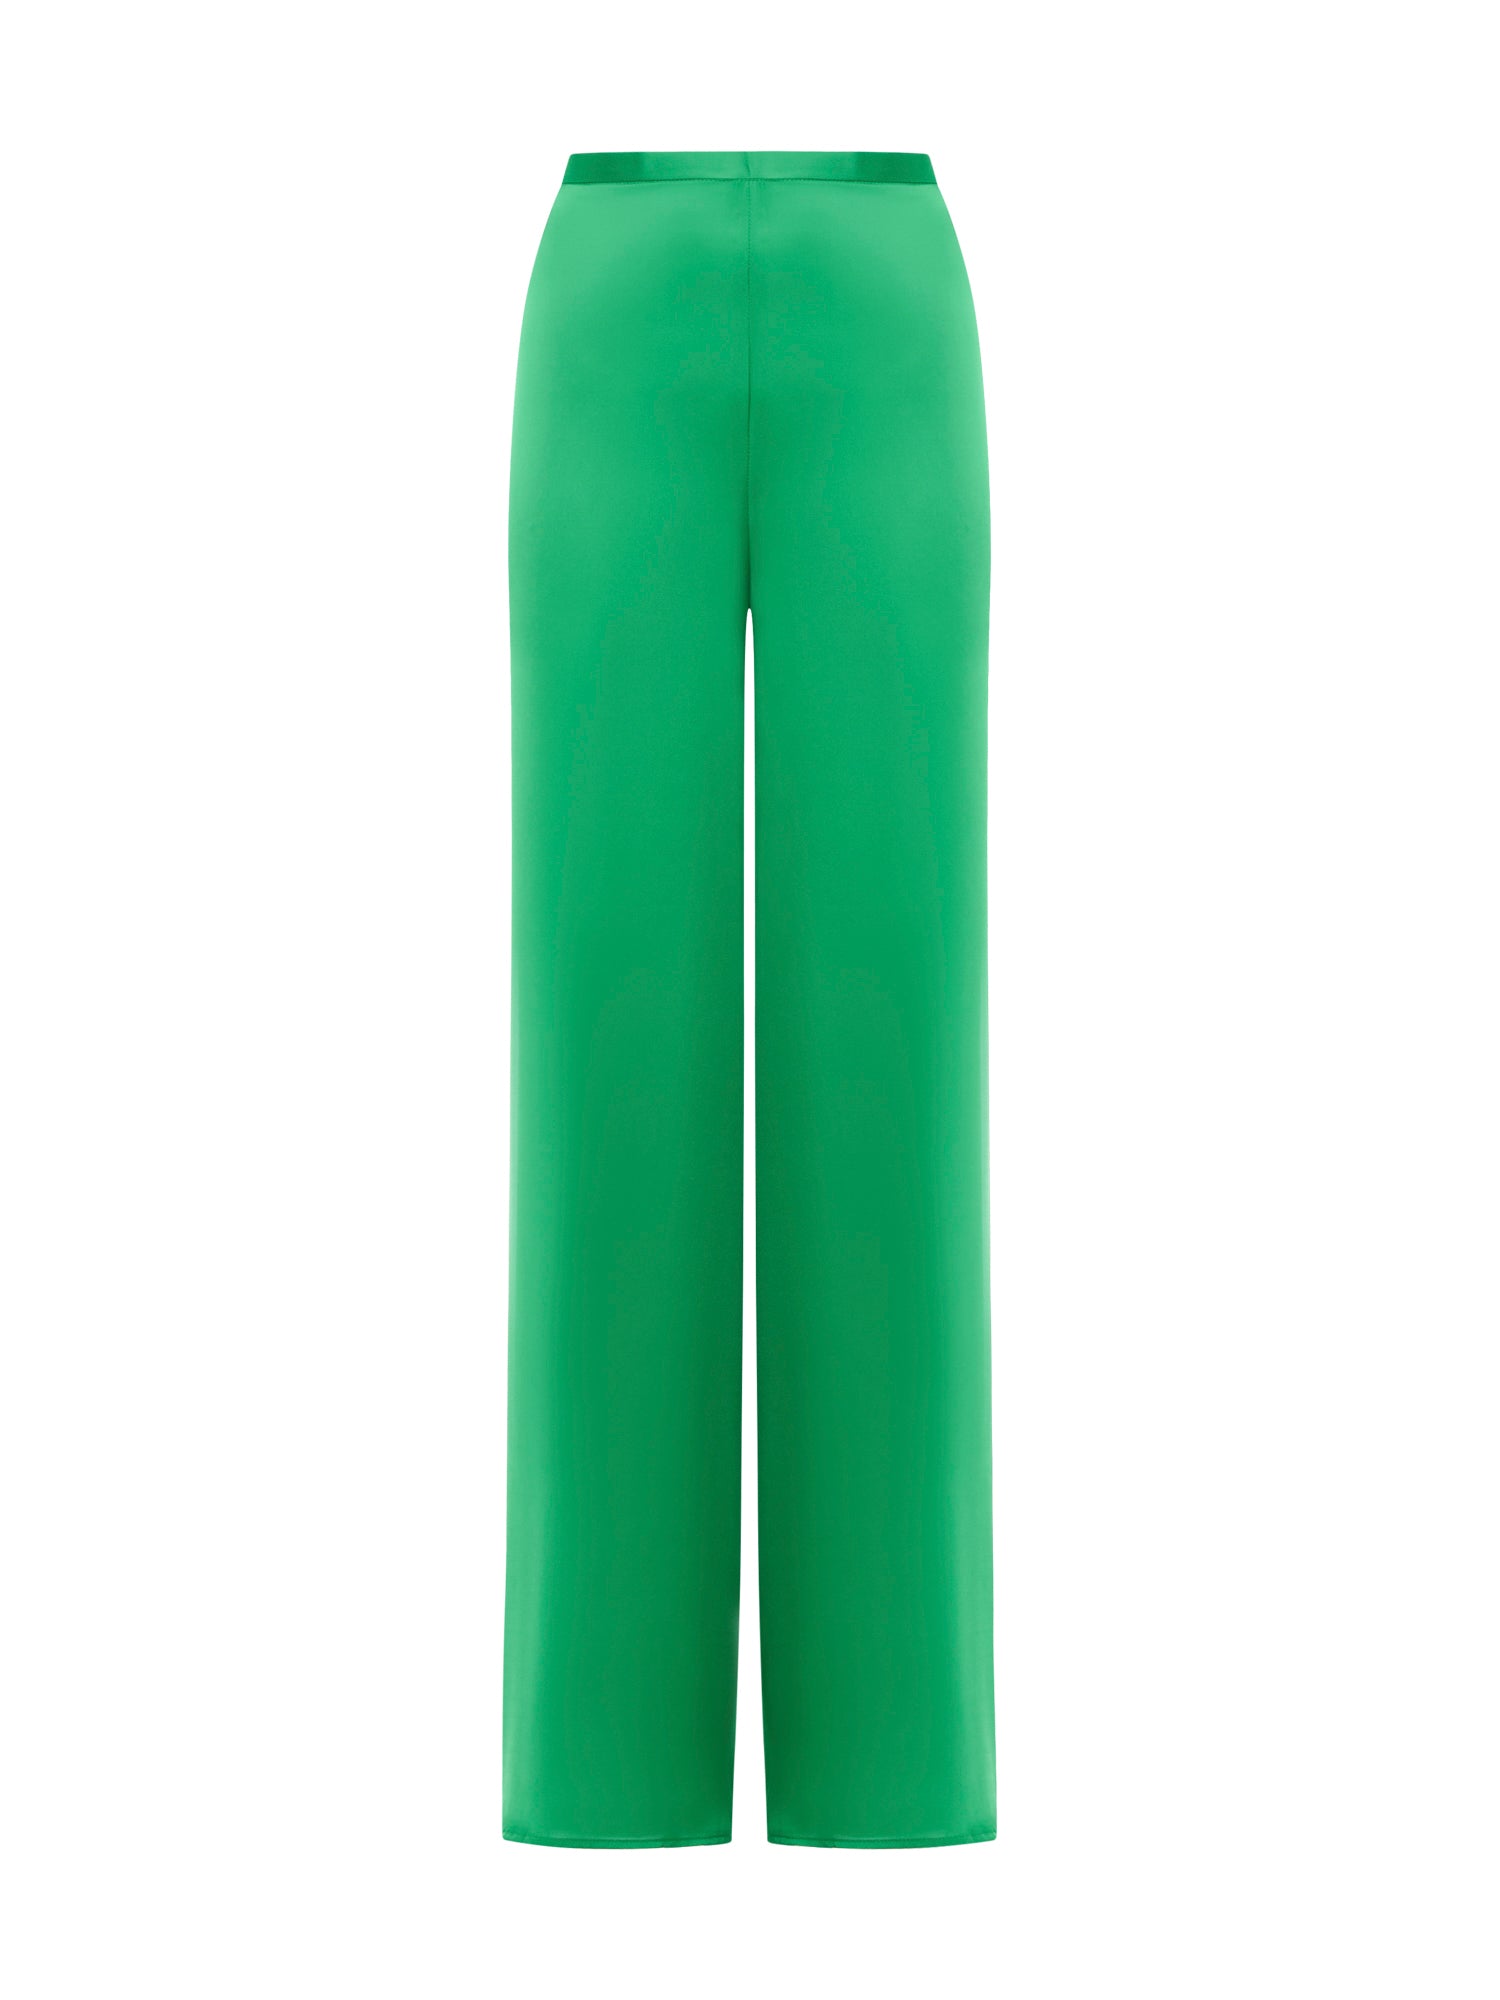 Palazzo trousers in fluid satin